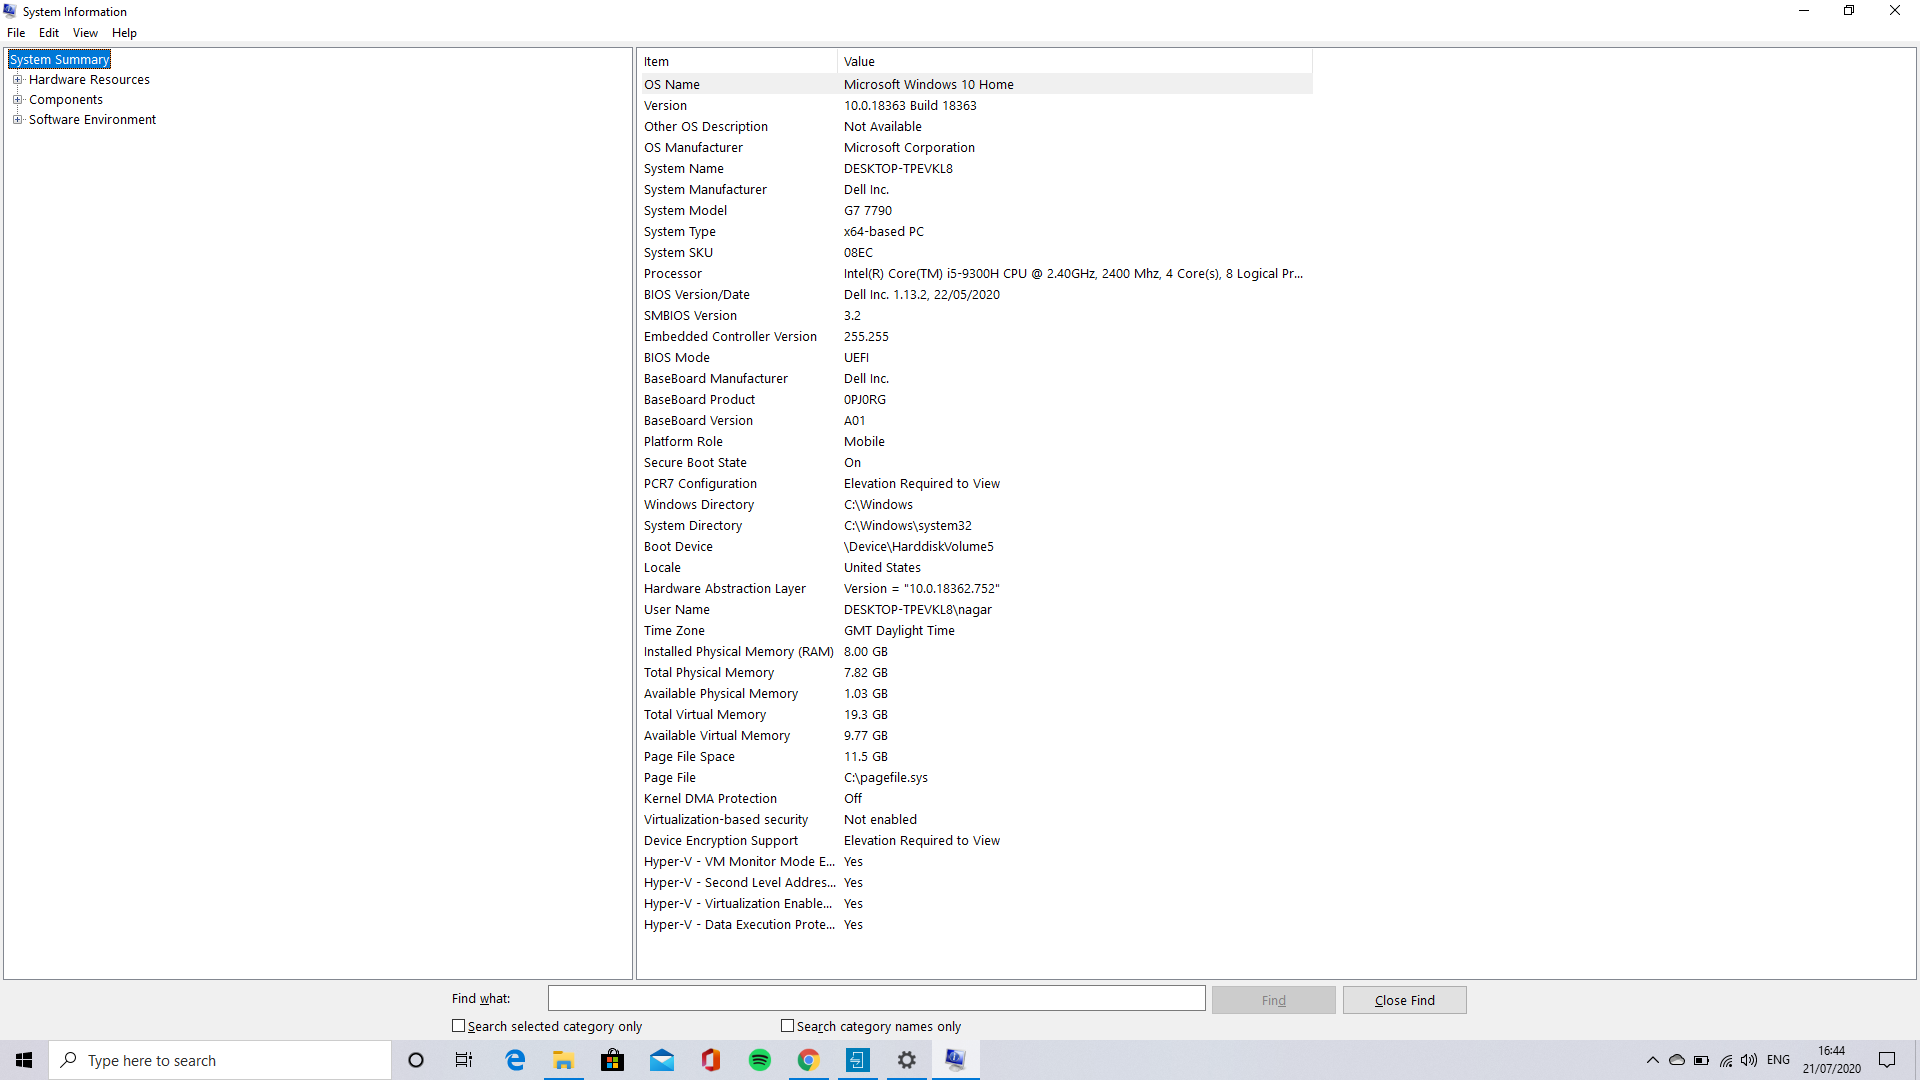 Bluetooth is missing from my laptop. 4efa30a5-84bd-4db3-8a83-b29bd0a5146f?upload=true.png